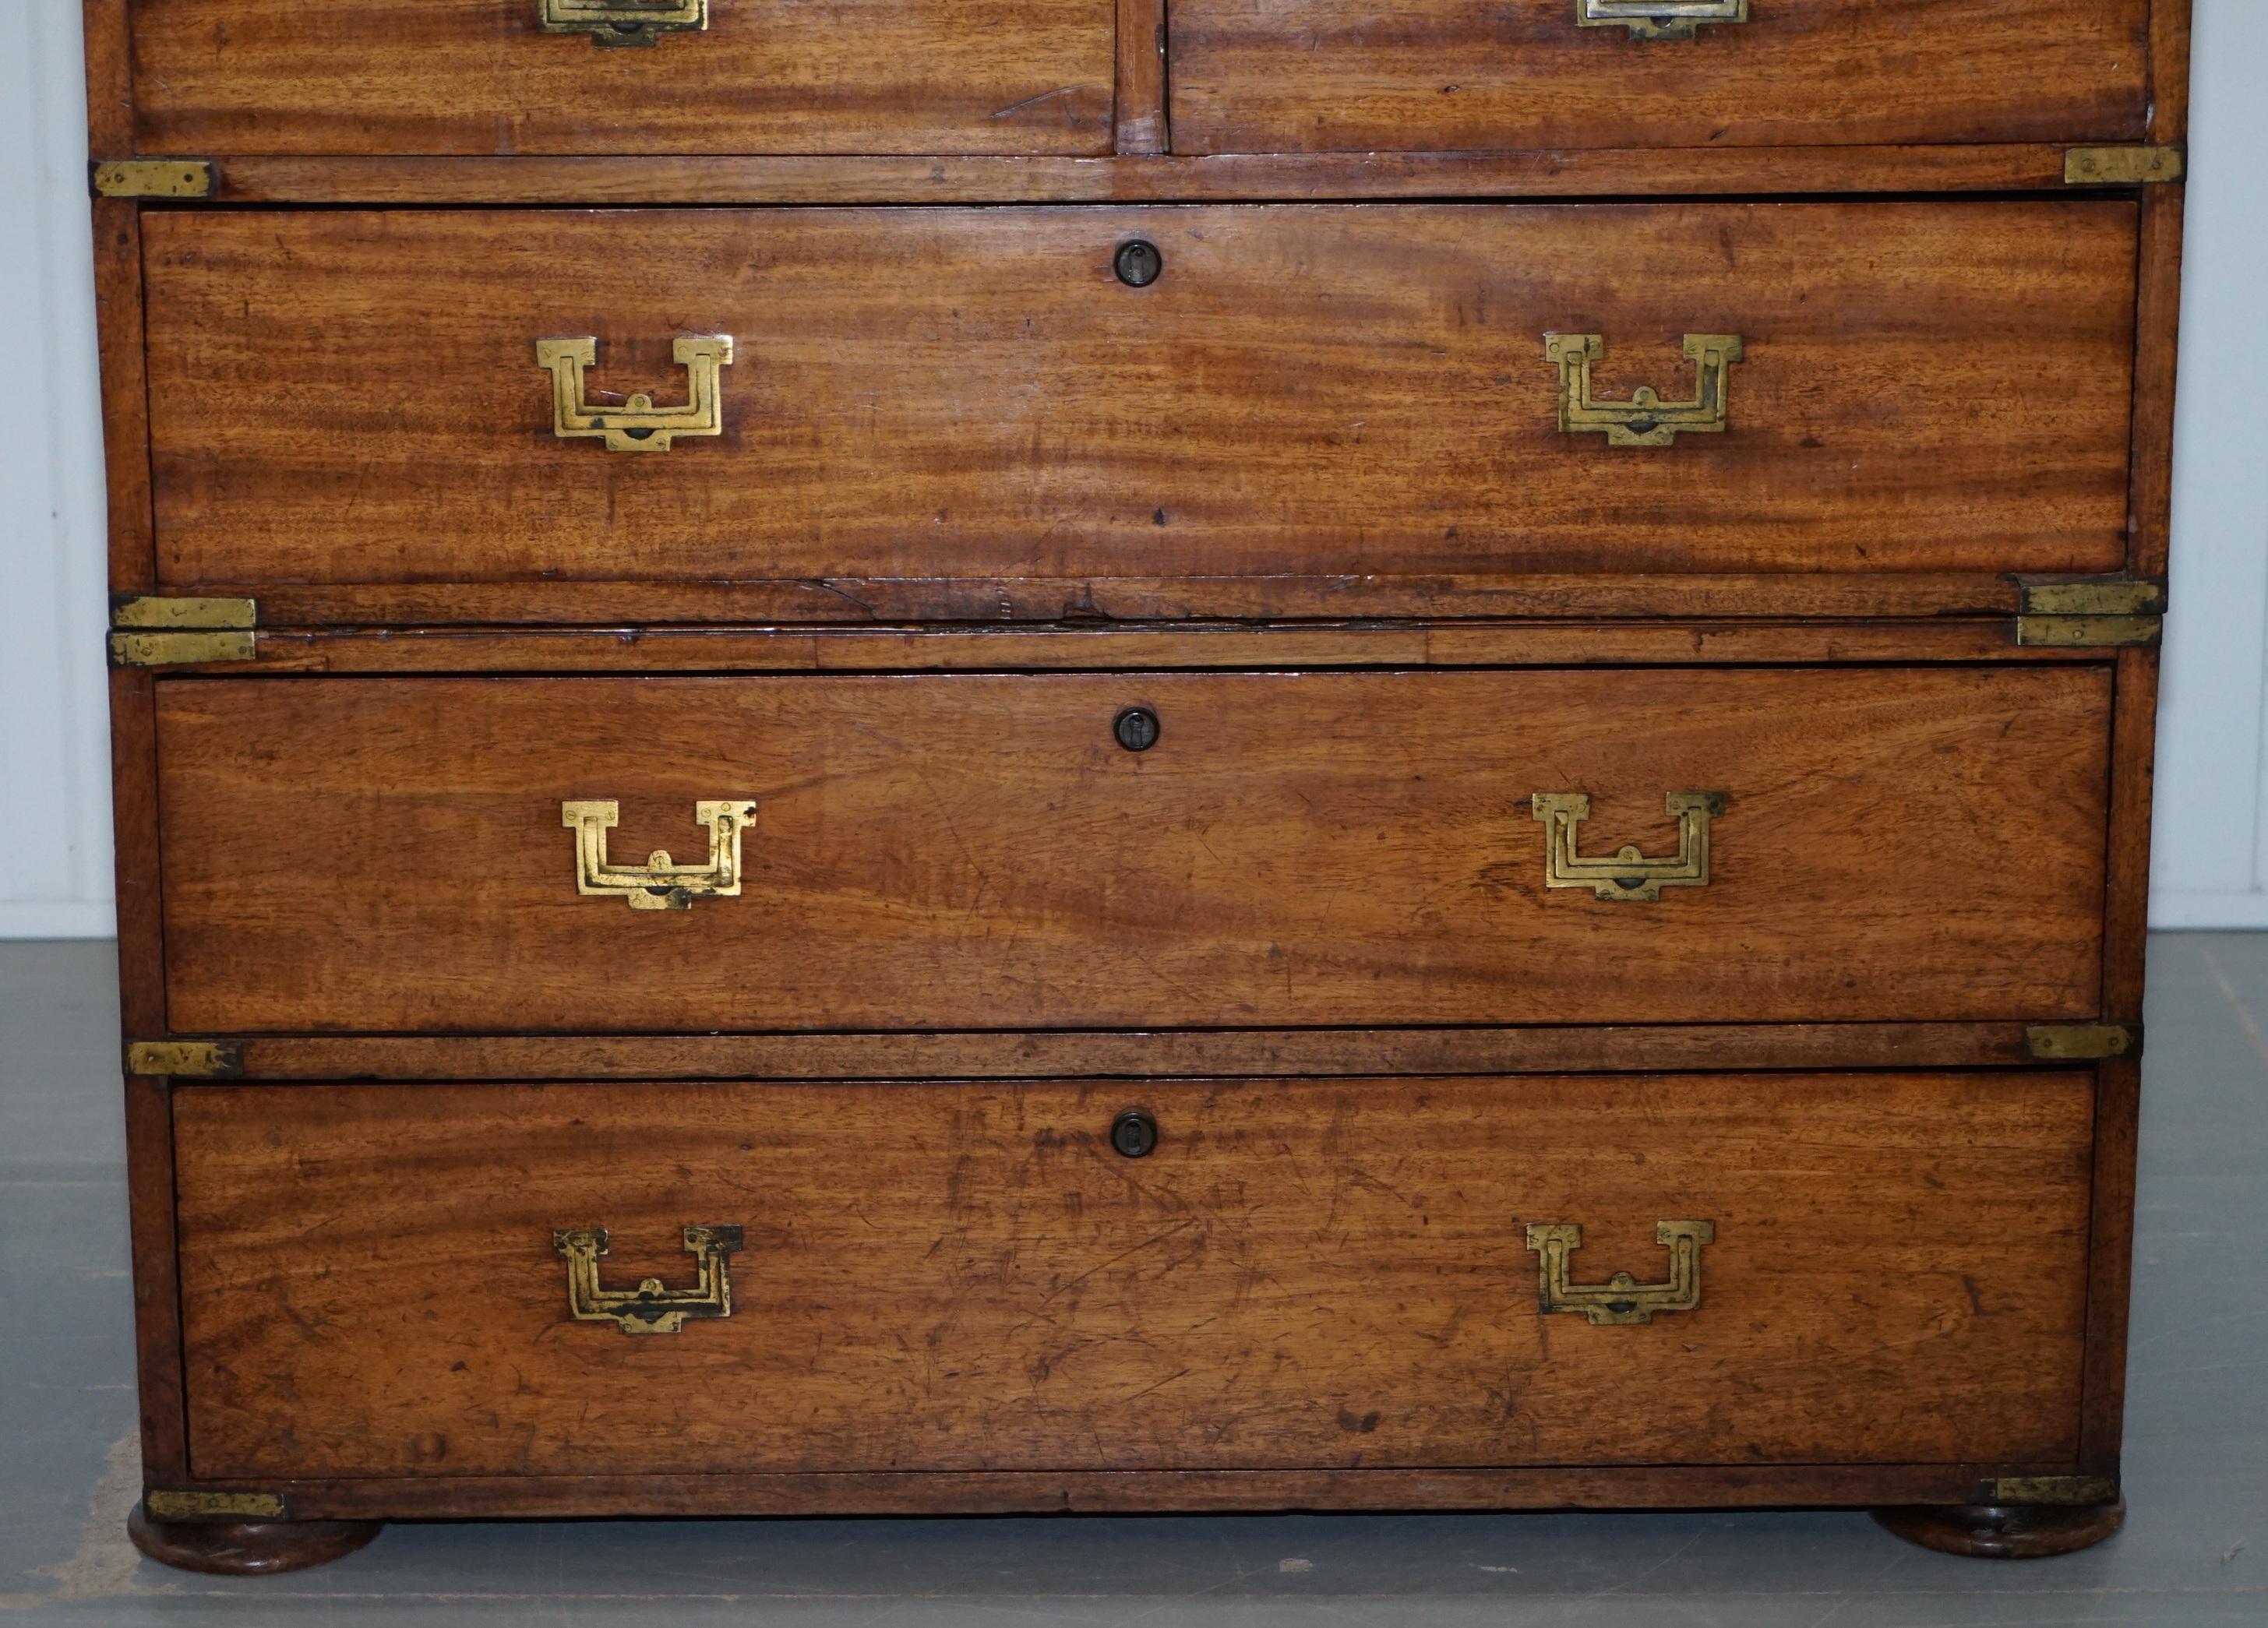 Rare Original 10th February 1813 Uk Napoleonic War Campaign Chest of Drawers 2